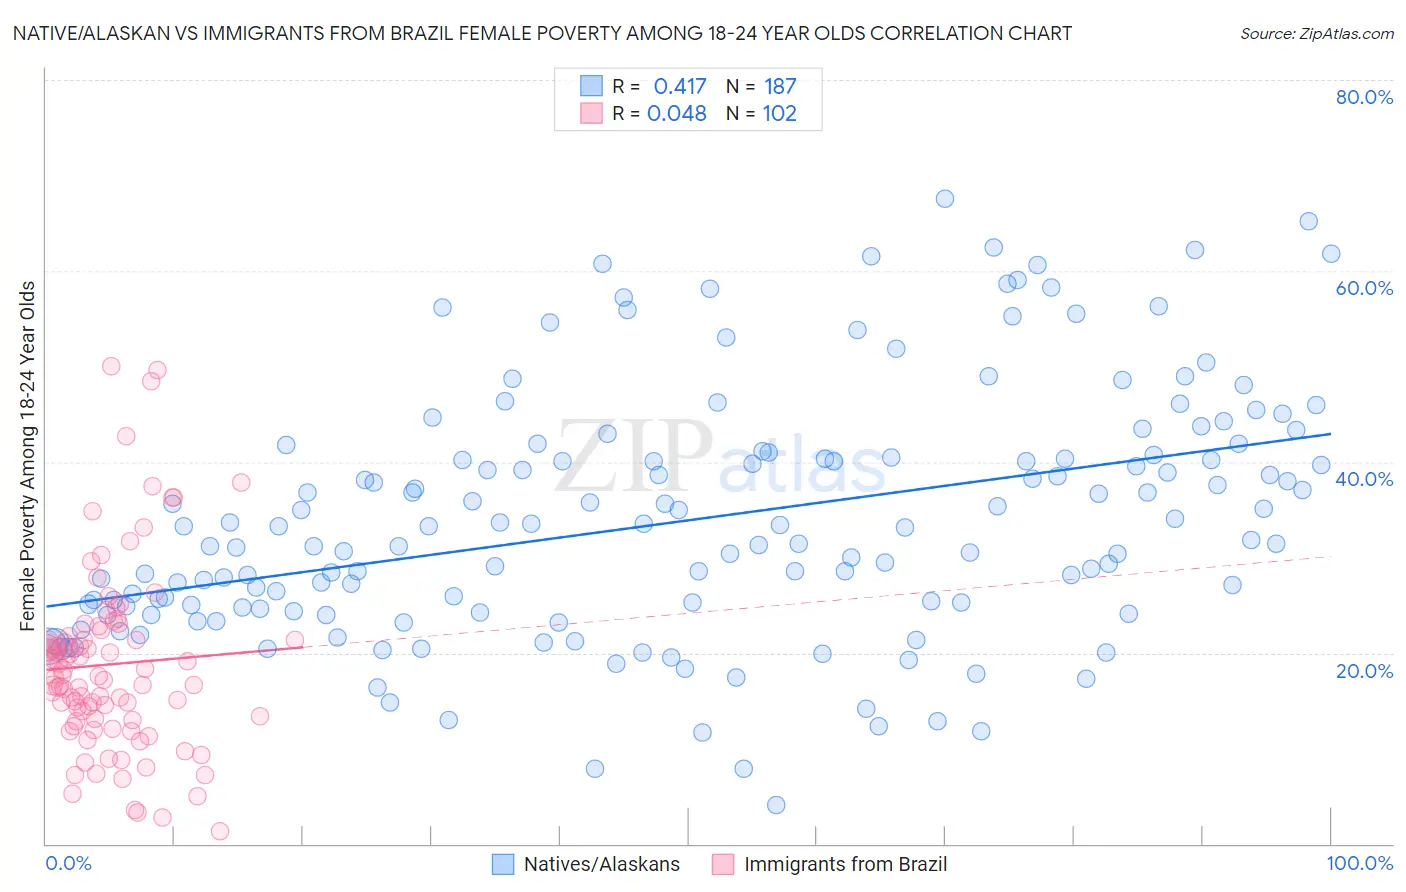 Native/Alaskan vs Immigrants from Brazil Female Poverty Among 18-24 Year Olds